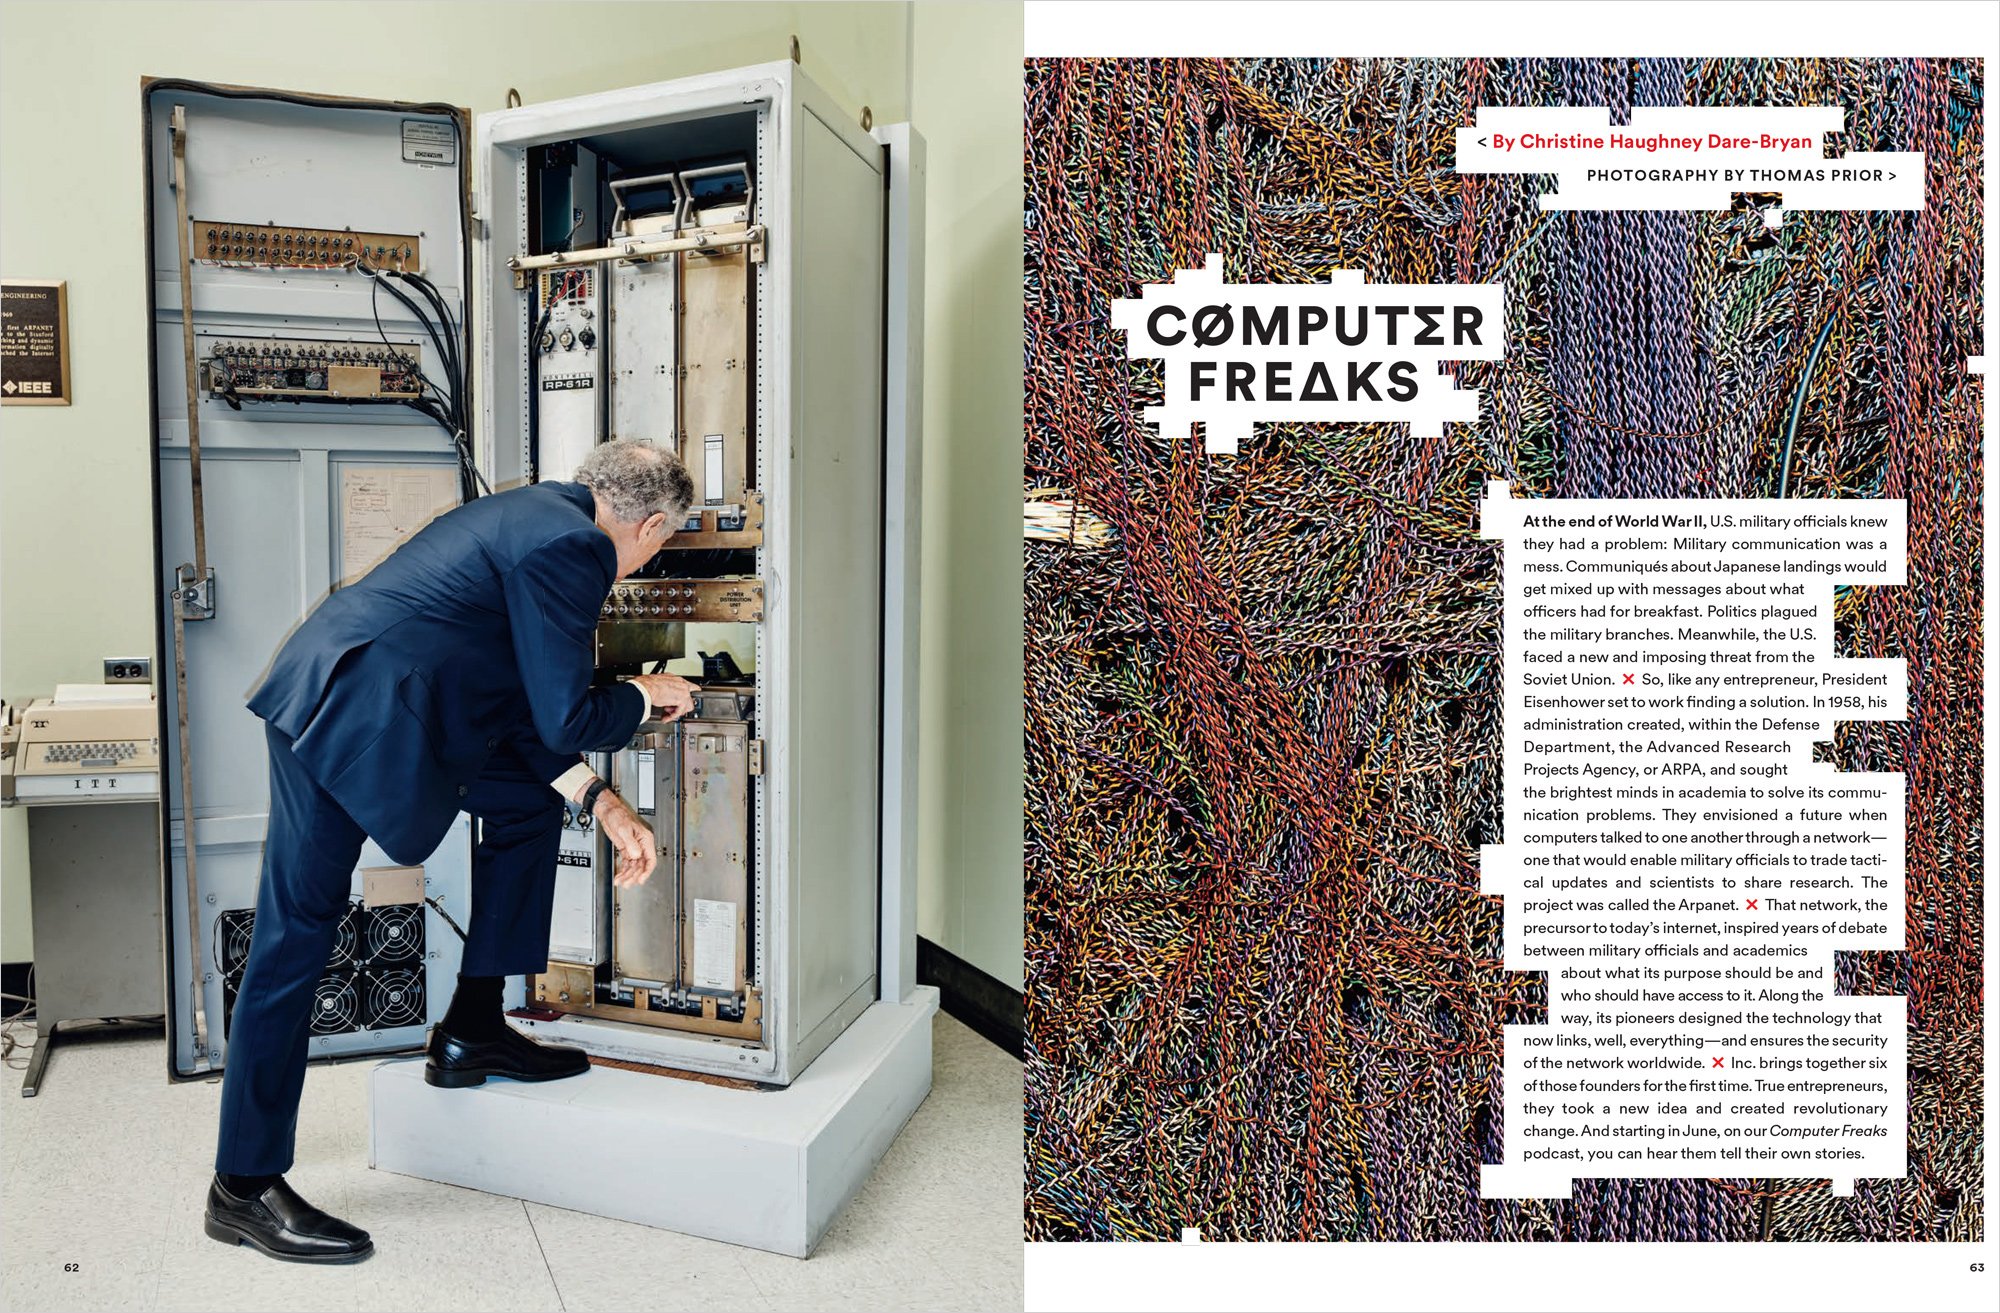 Computer Freaks - the founders of ARPAnet, precursor to the Internet